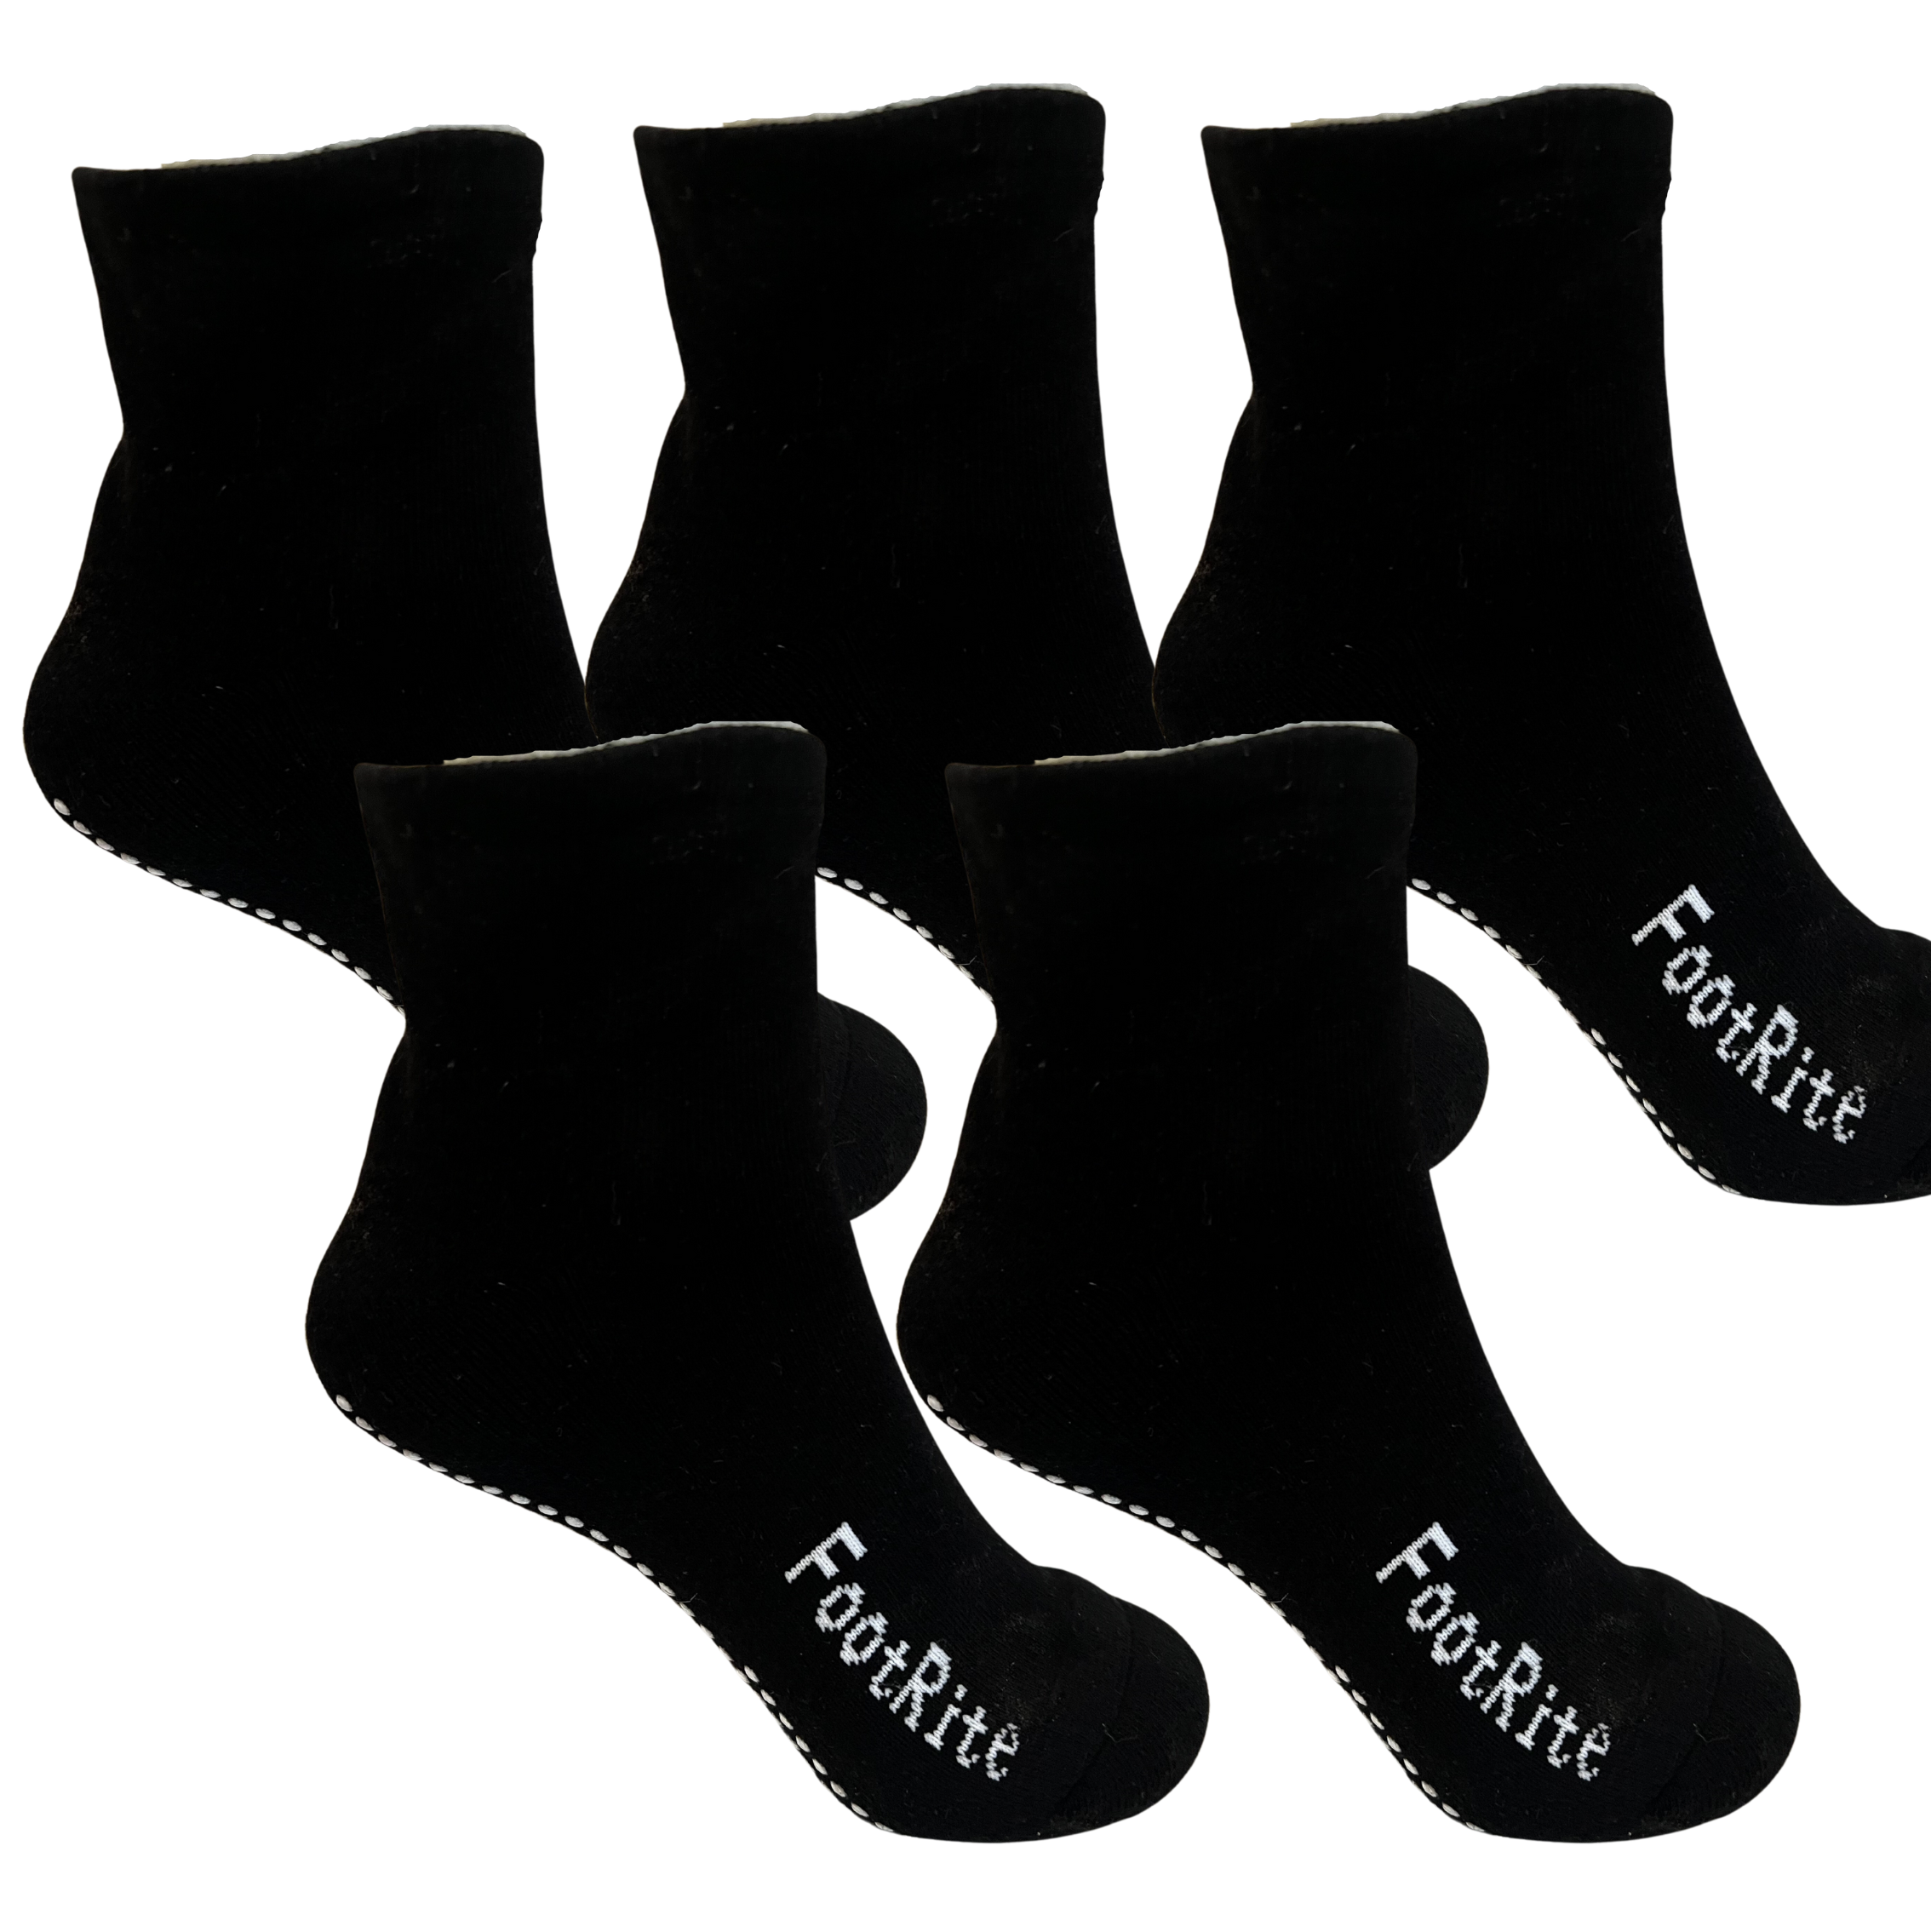 5 Pairs of Non Slip Grip Socks suitable for Hospital and Home